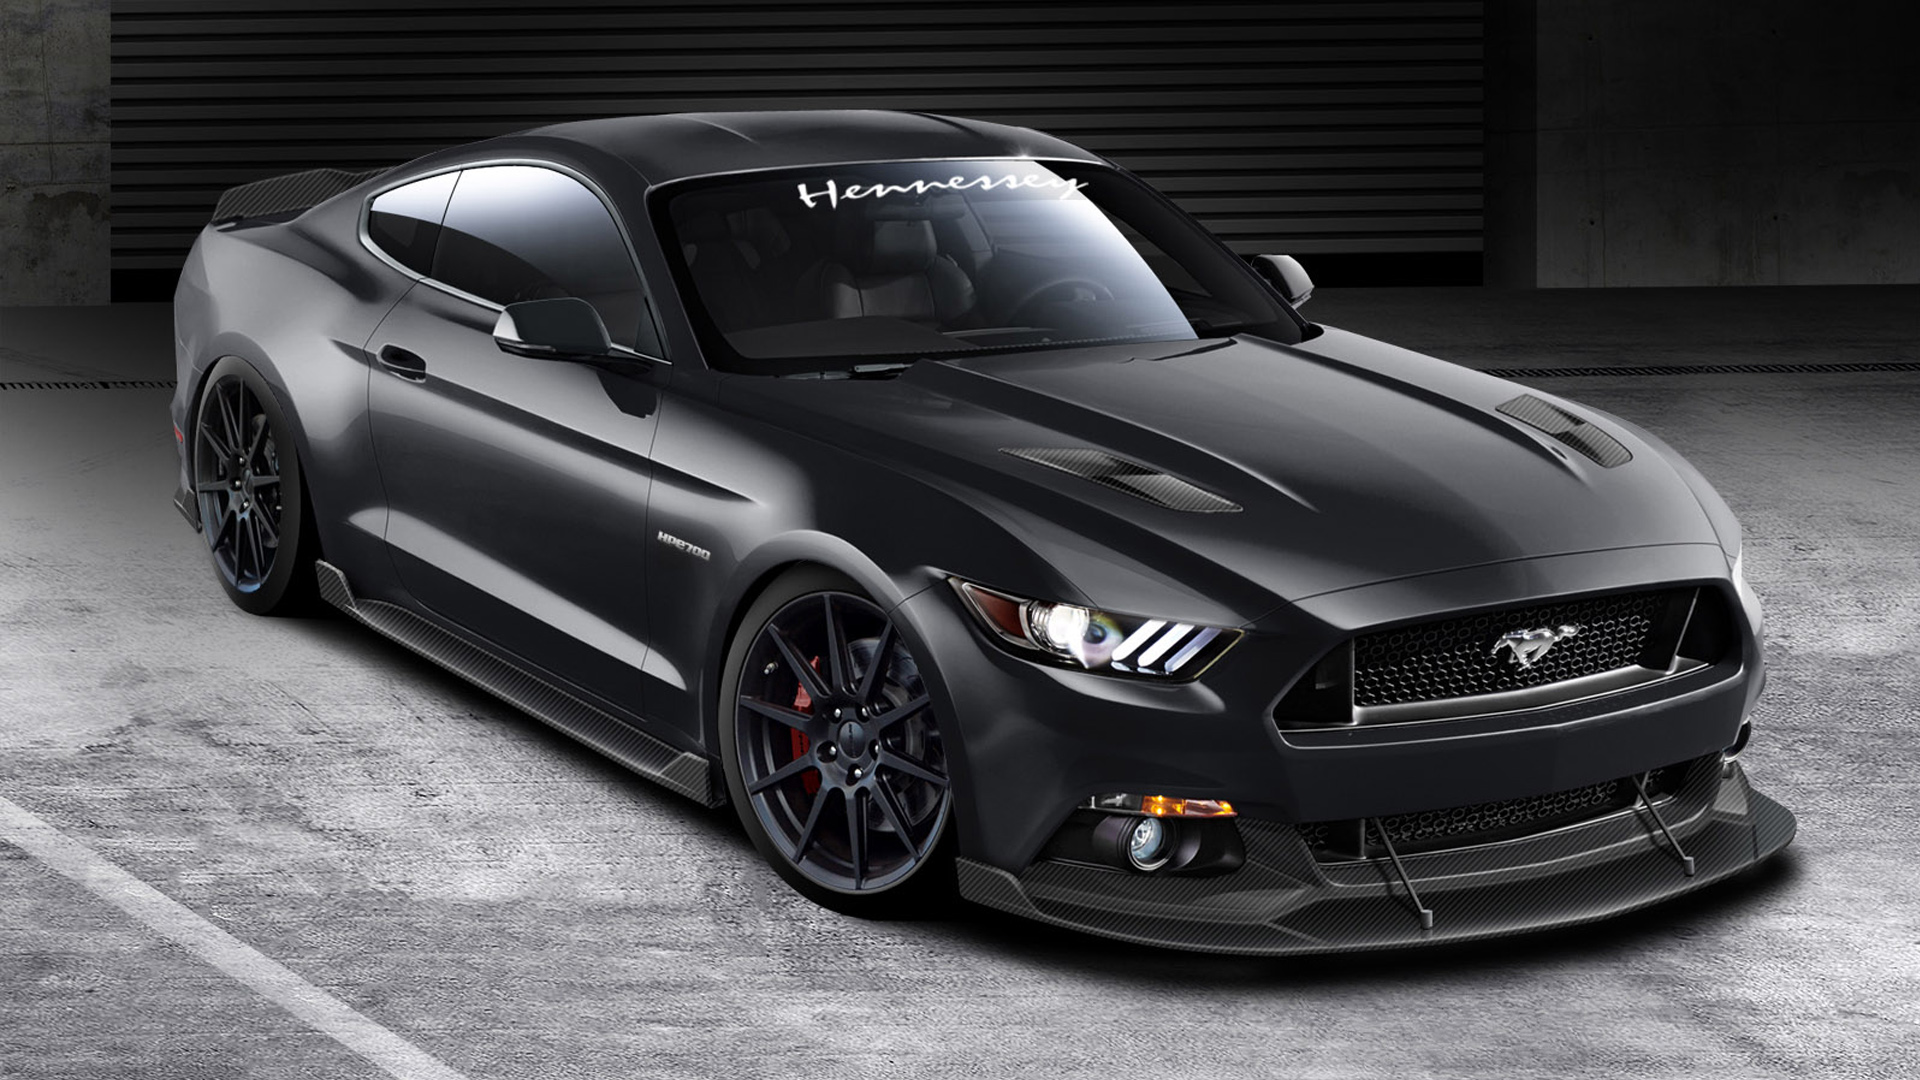  Hennessey Ford Mustang GT Wallpaper HD Car Wallpapers